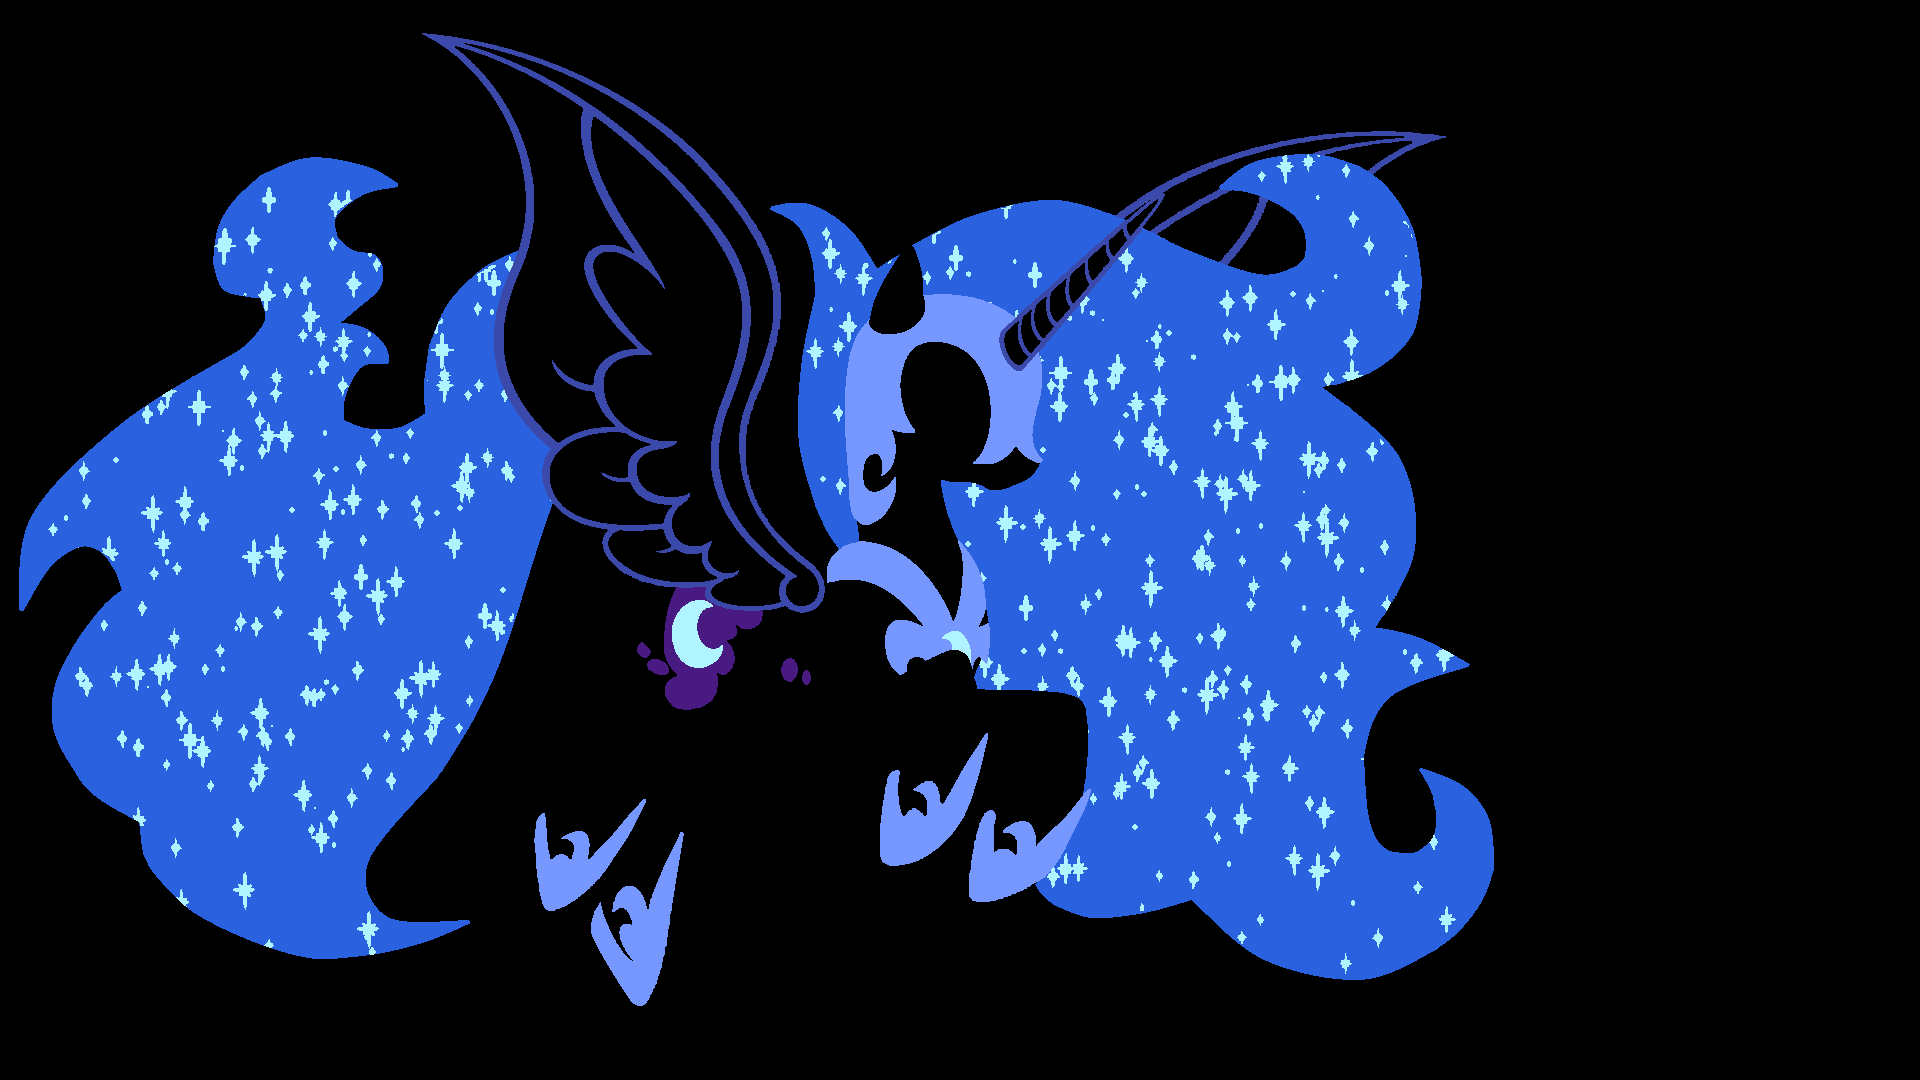 Nightmare Moon Wallpaper by Kitana Coldfire on